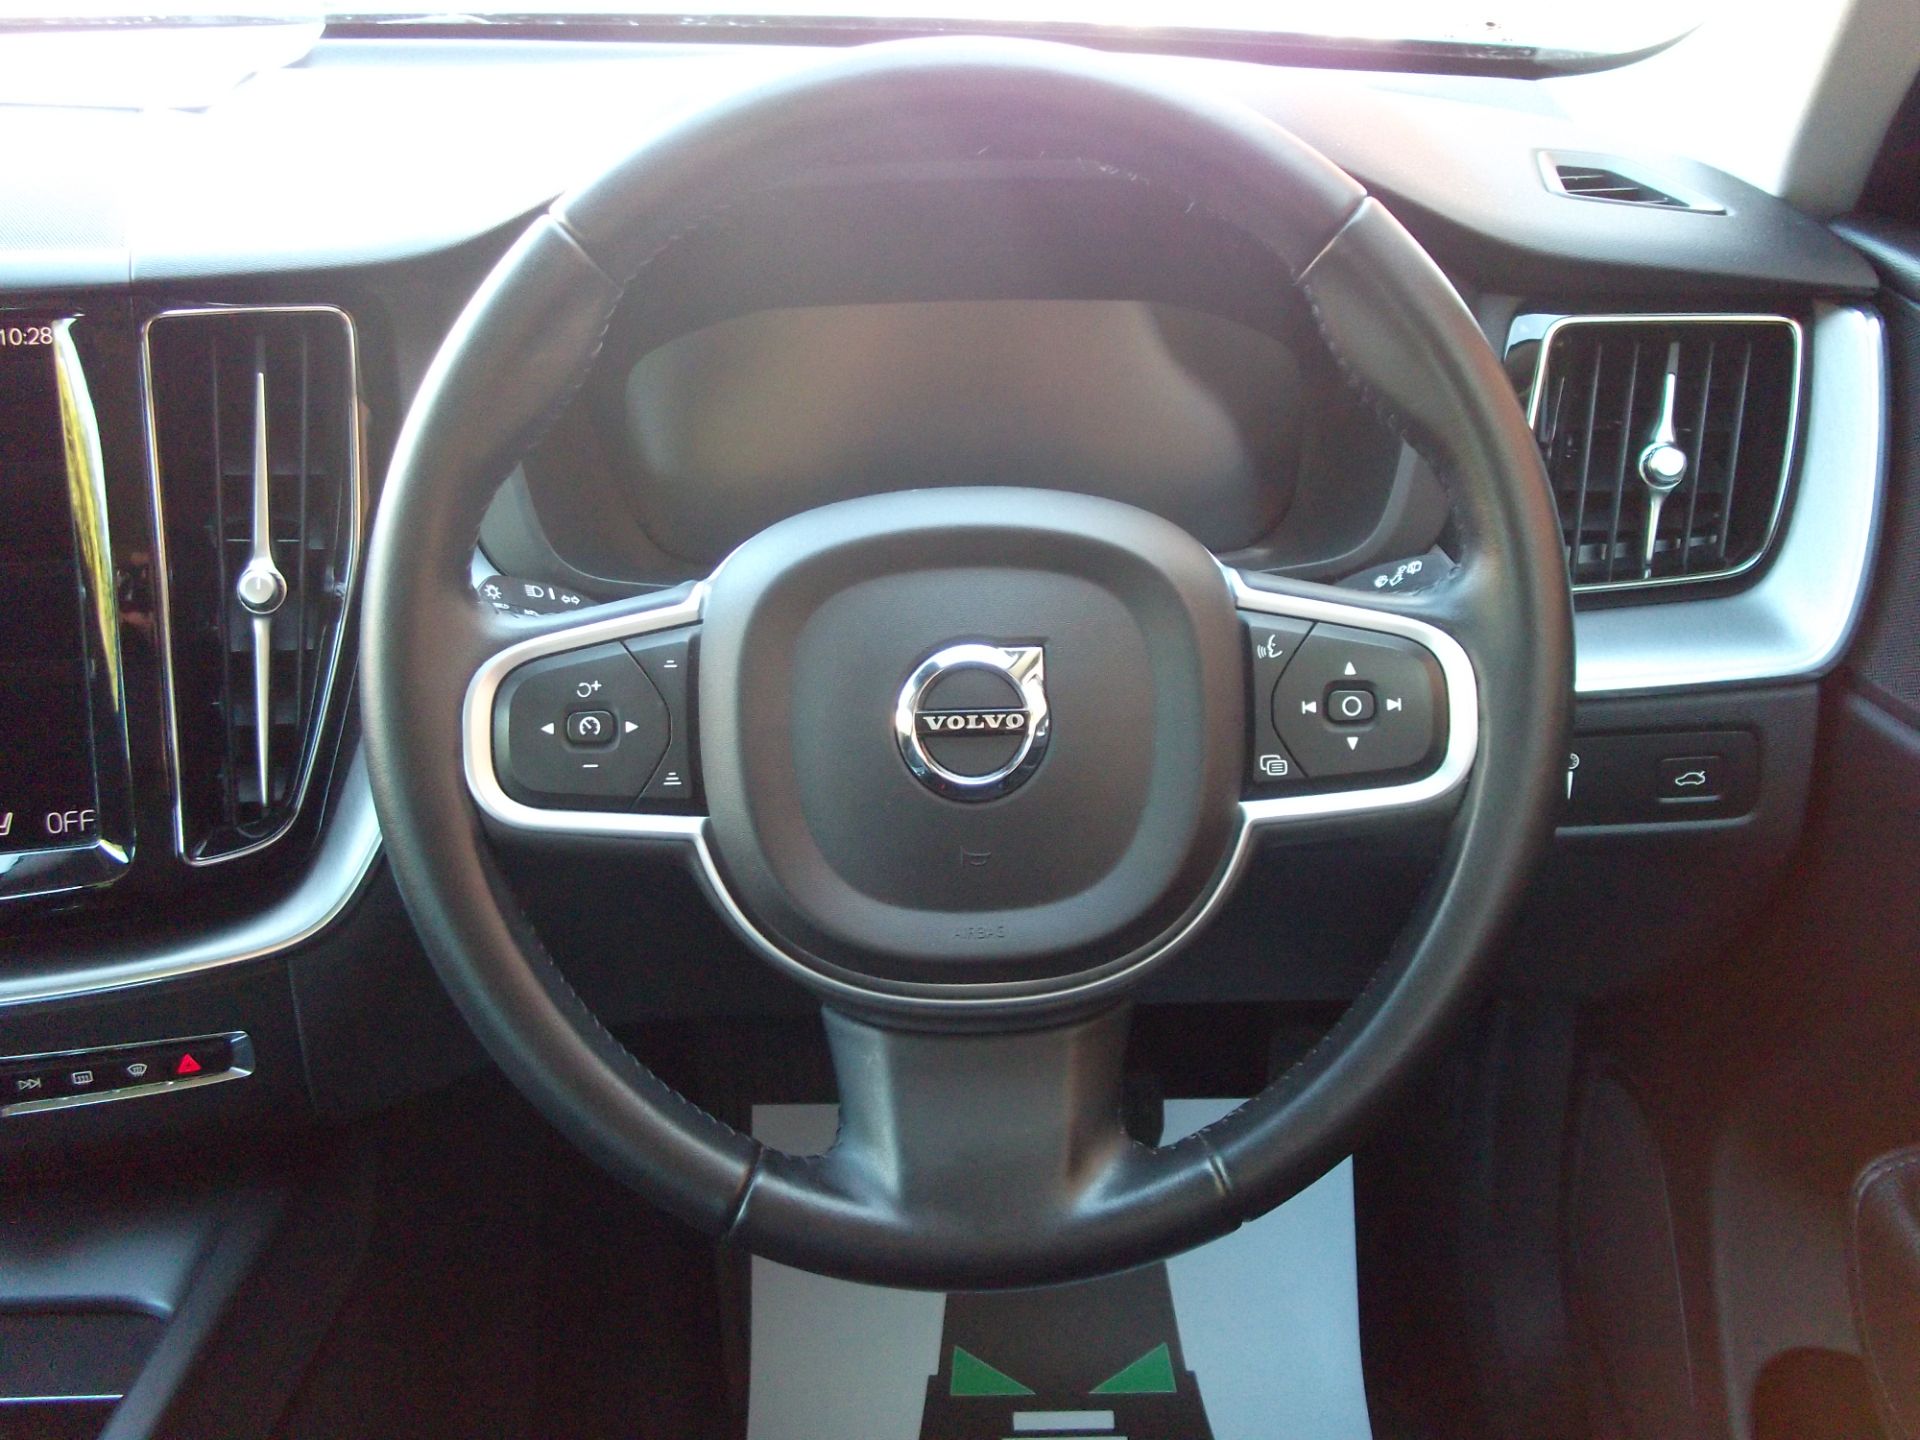 2021 Volvo Xc60 2.0 B5p [250] Momentum 5Dr AWD Geartronic (RX21OVM) Image 13